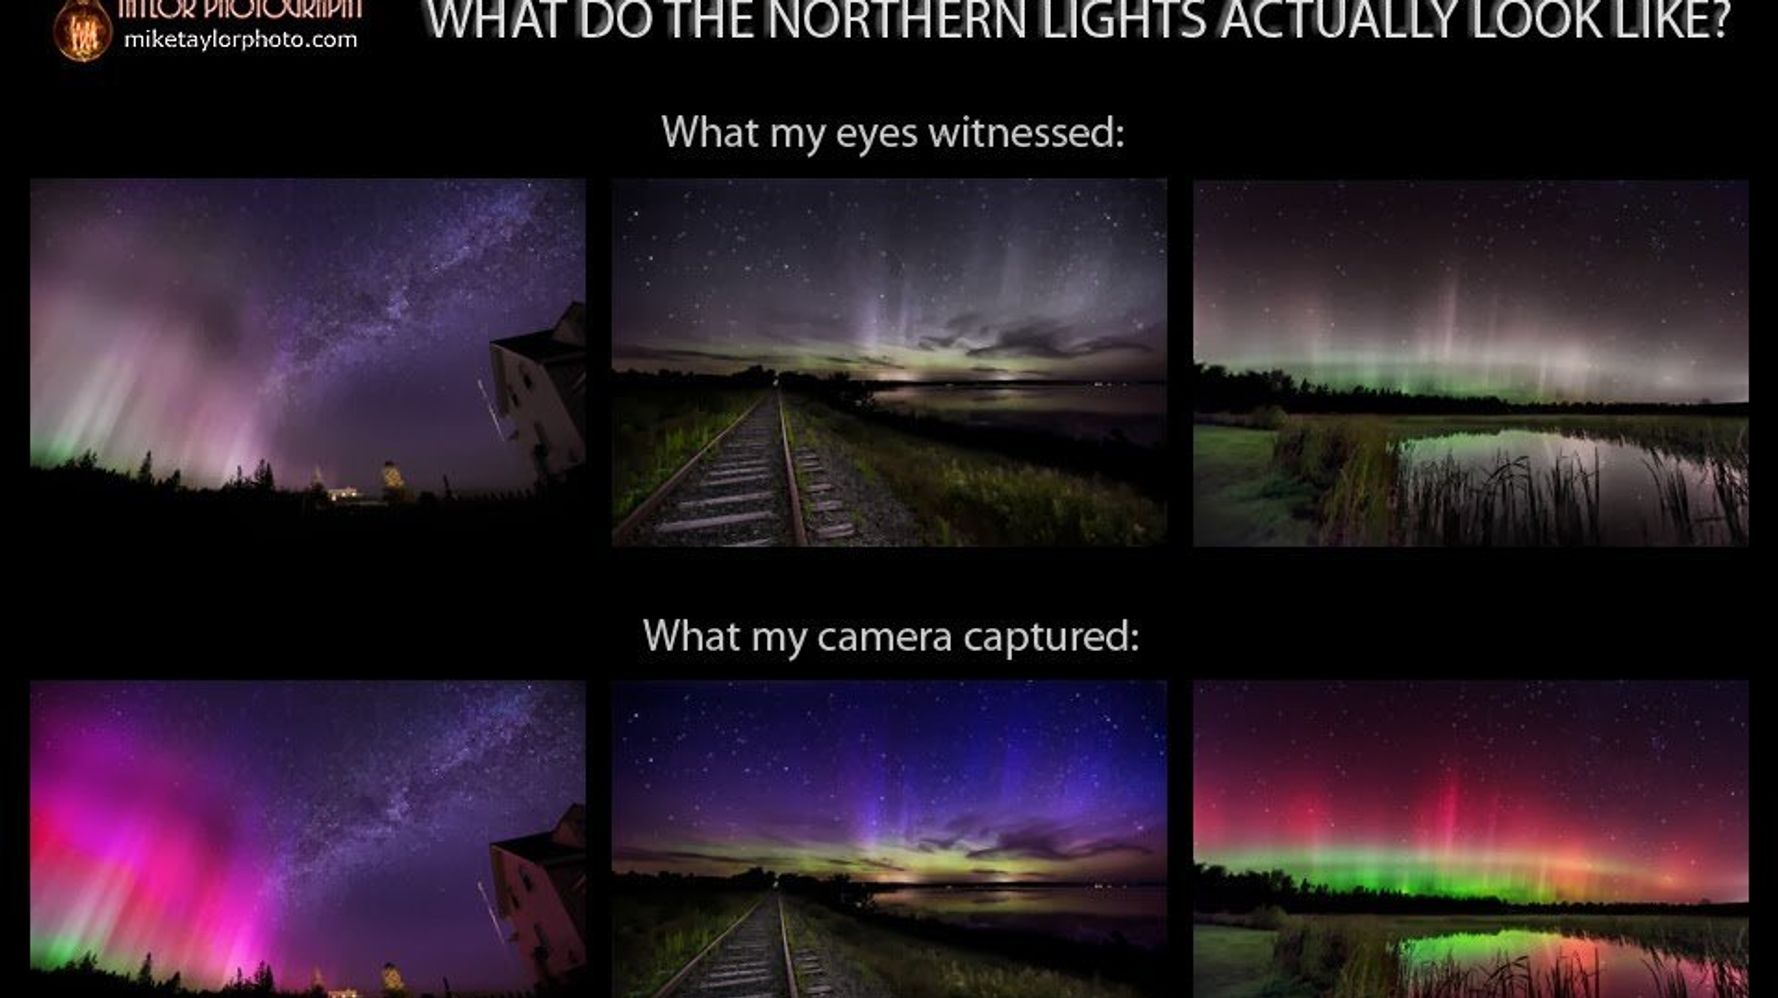 Northern Lights: What Do They Really Look Like? - Life in Norway